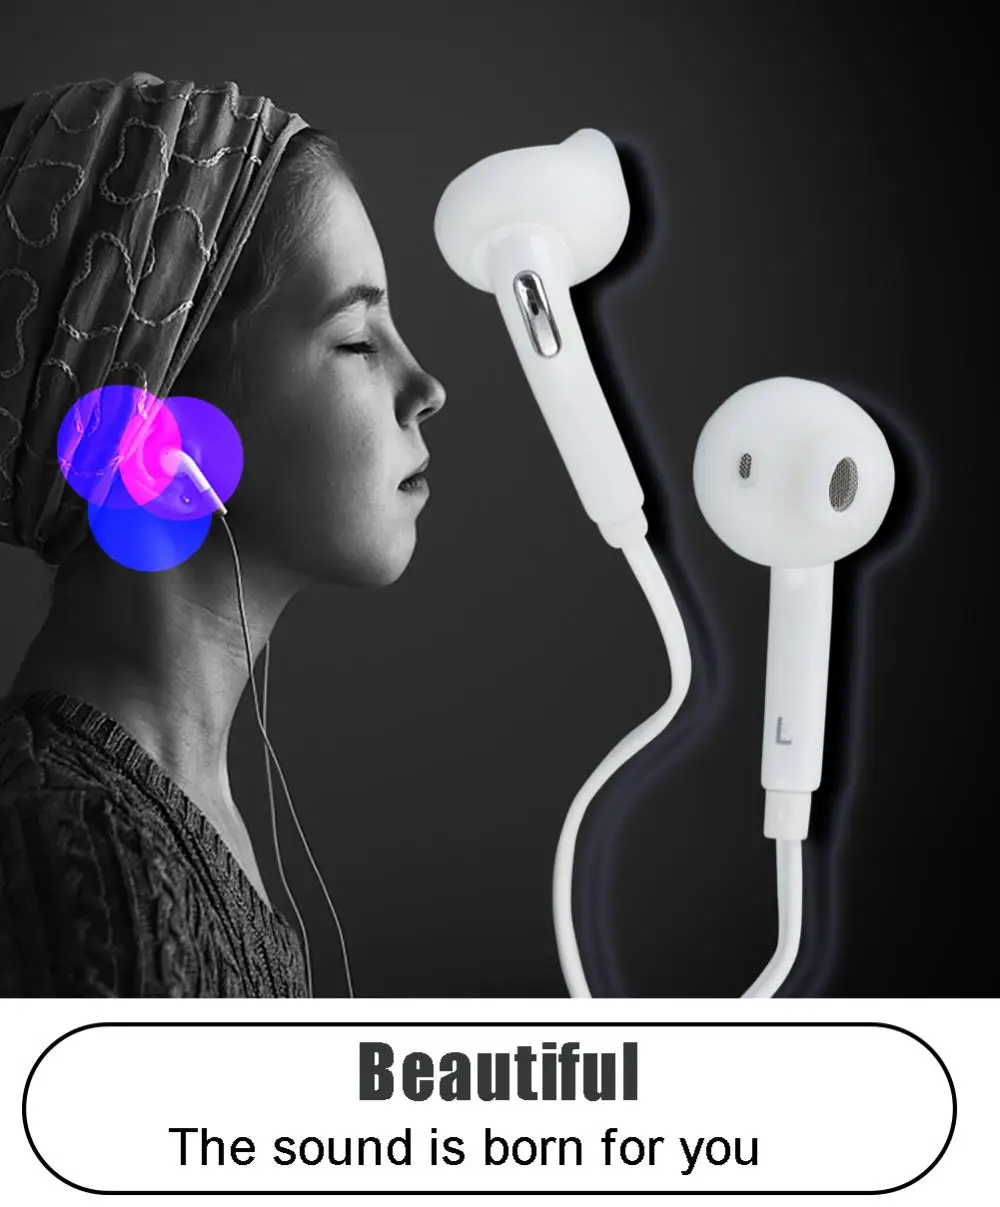 

Original Samsung Galaxy S6 Earphones With Built-in Microphone 3.5mm In-Ear Wired With Speaker Headsets for Samung Huawei Xiaomi